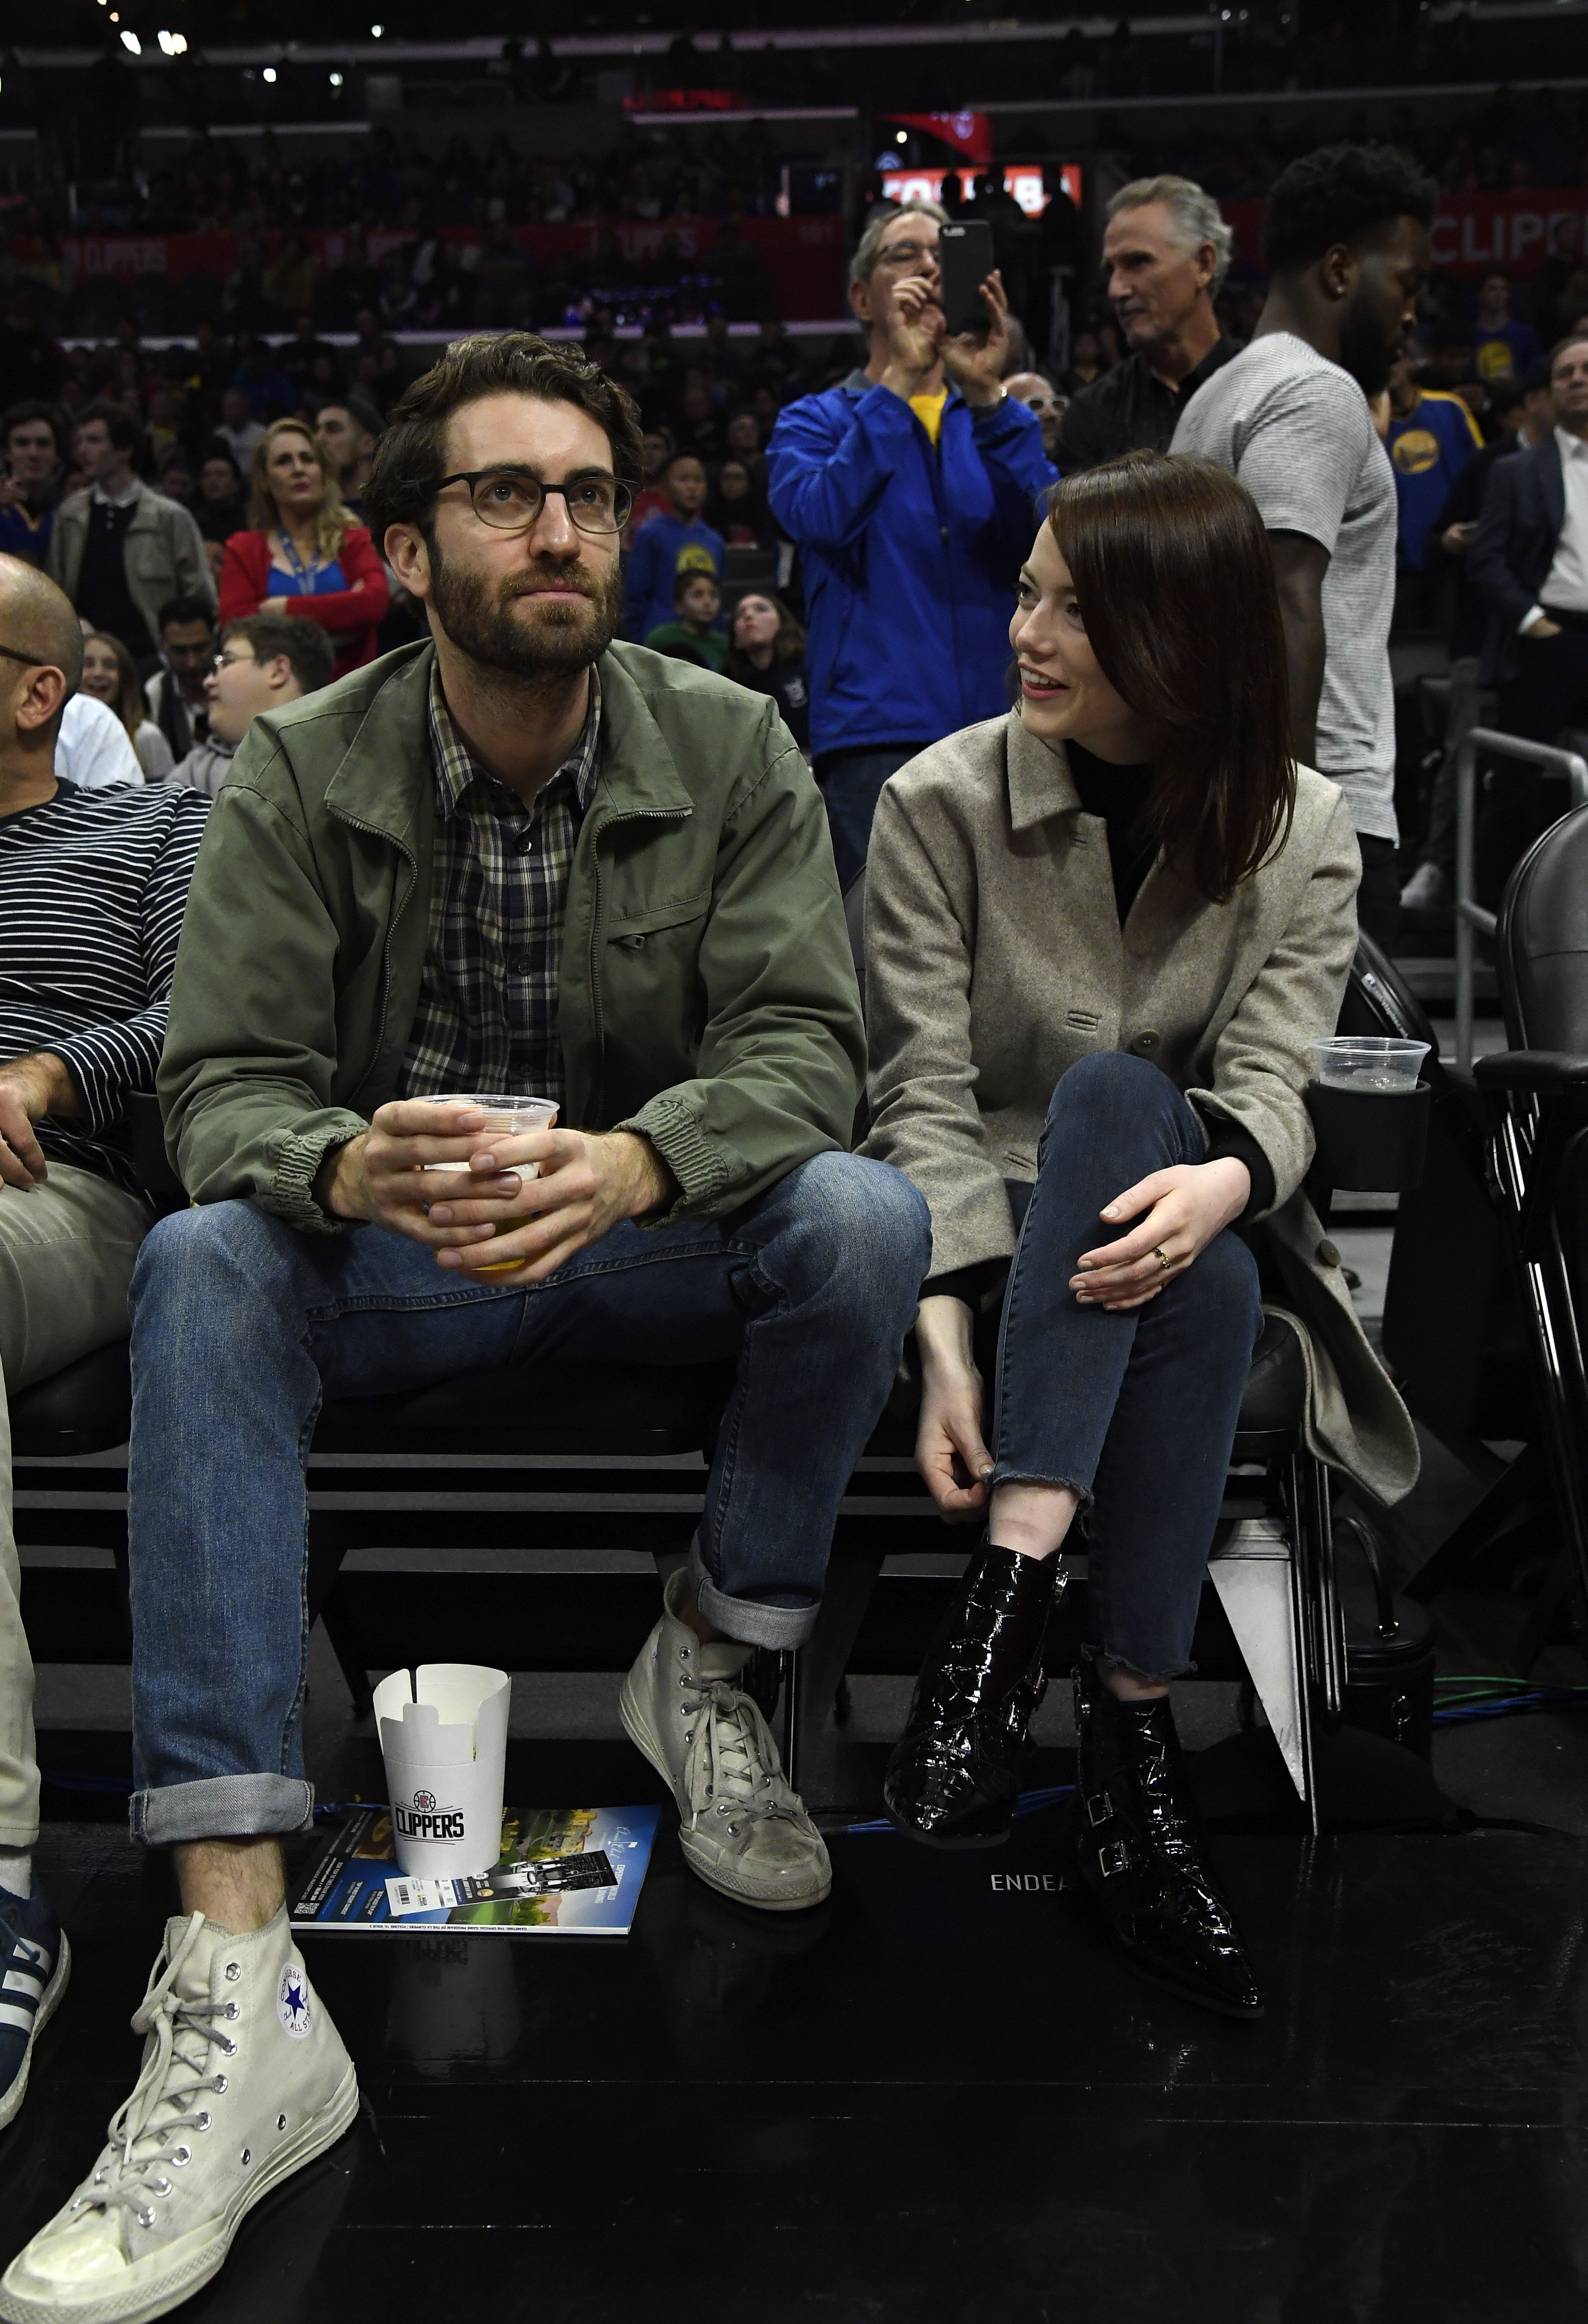 La La Land Star Emma Stone Ties The Knot With Fiancé Dave McCary Amid  Lockdown? That's What Netizens Think